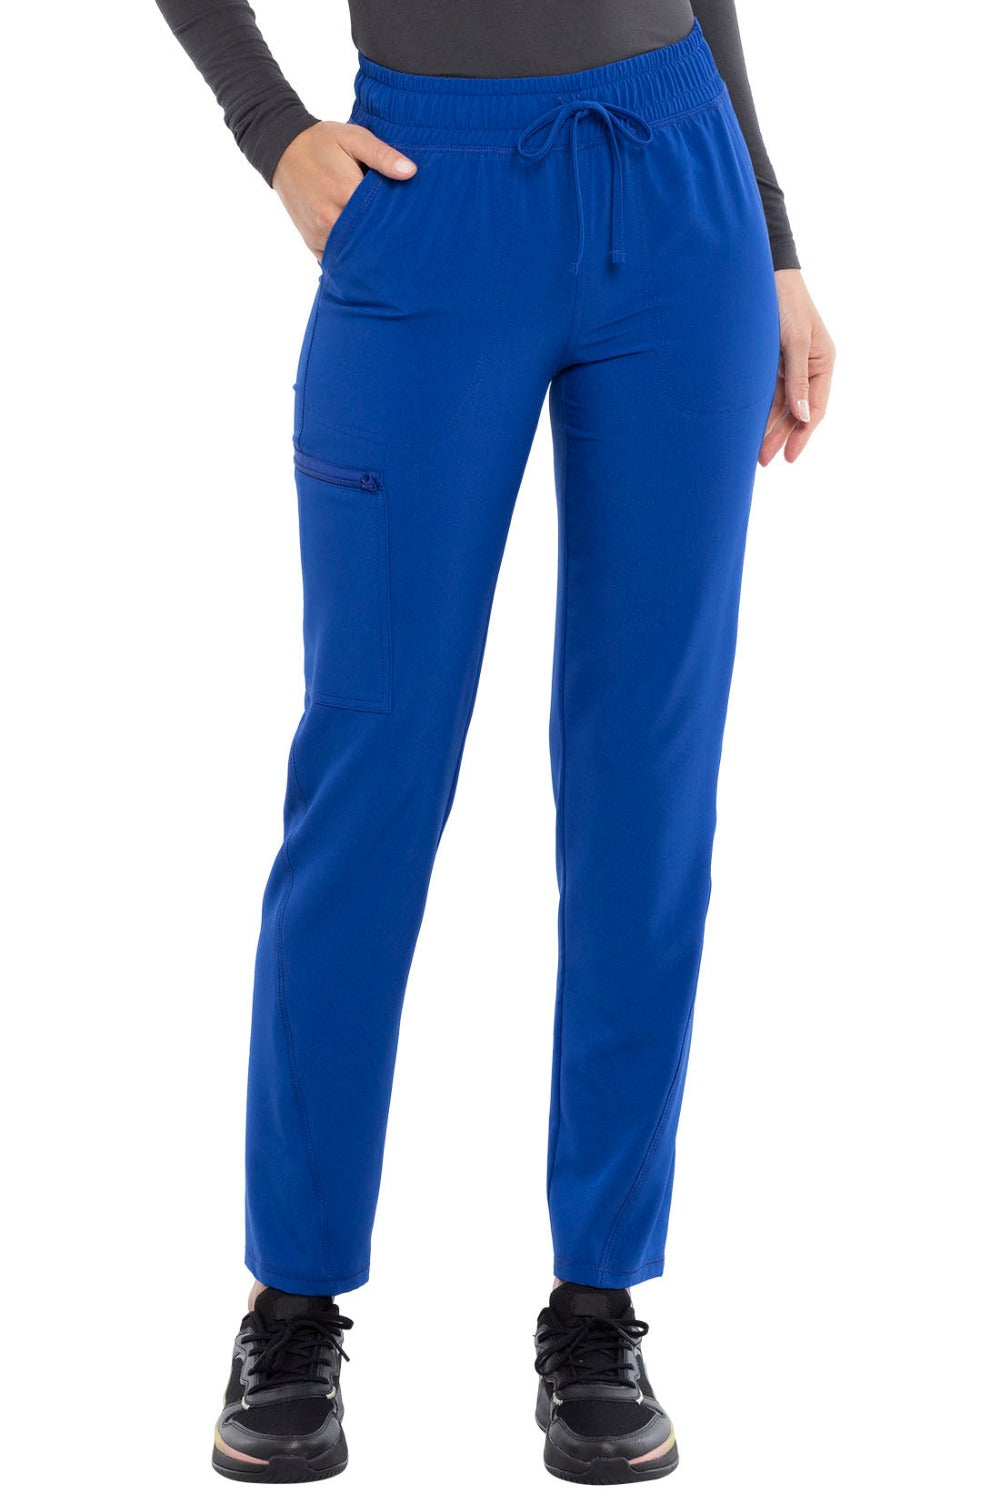 Cherokee Allura Petite Scrub Pant Mid Rise Tapered Leg Drawstring in Galaxy Blue at Parker's Clothing and Shoes.